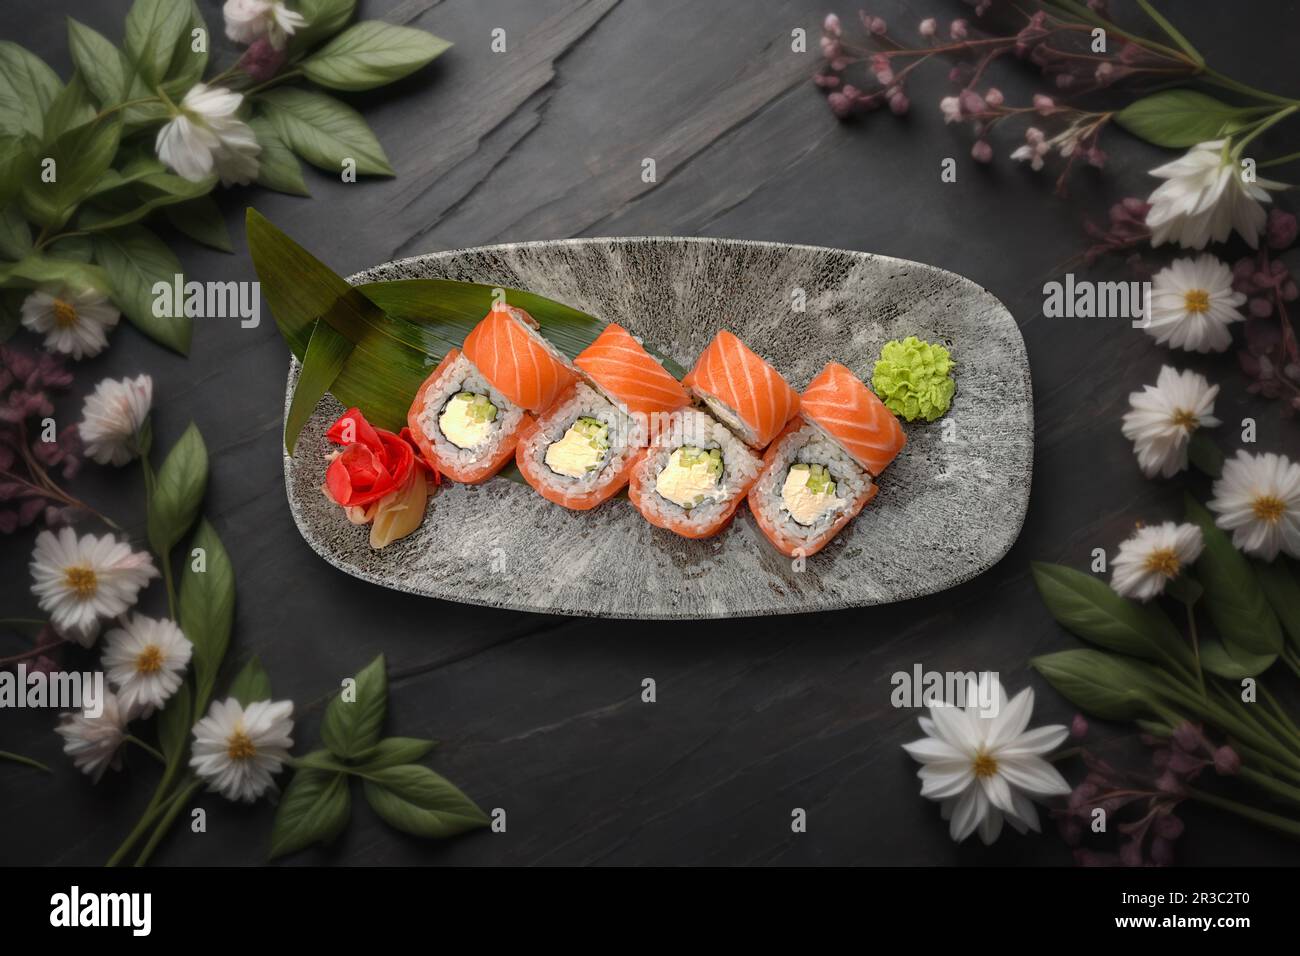 sushi roll featuring salmon, creamy cheese, and avocado on a textured stone surface with floral embellishments Stock Photo